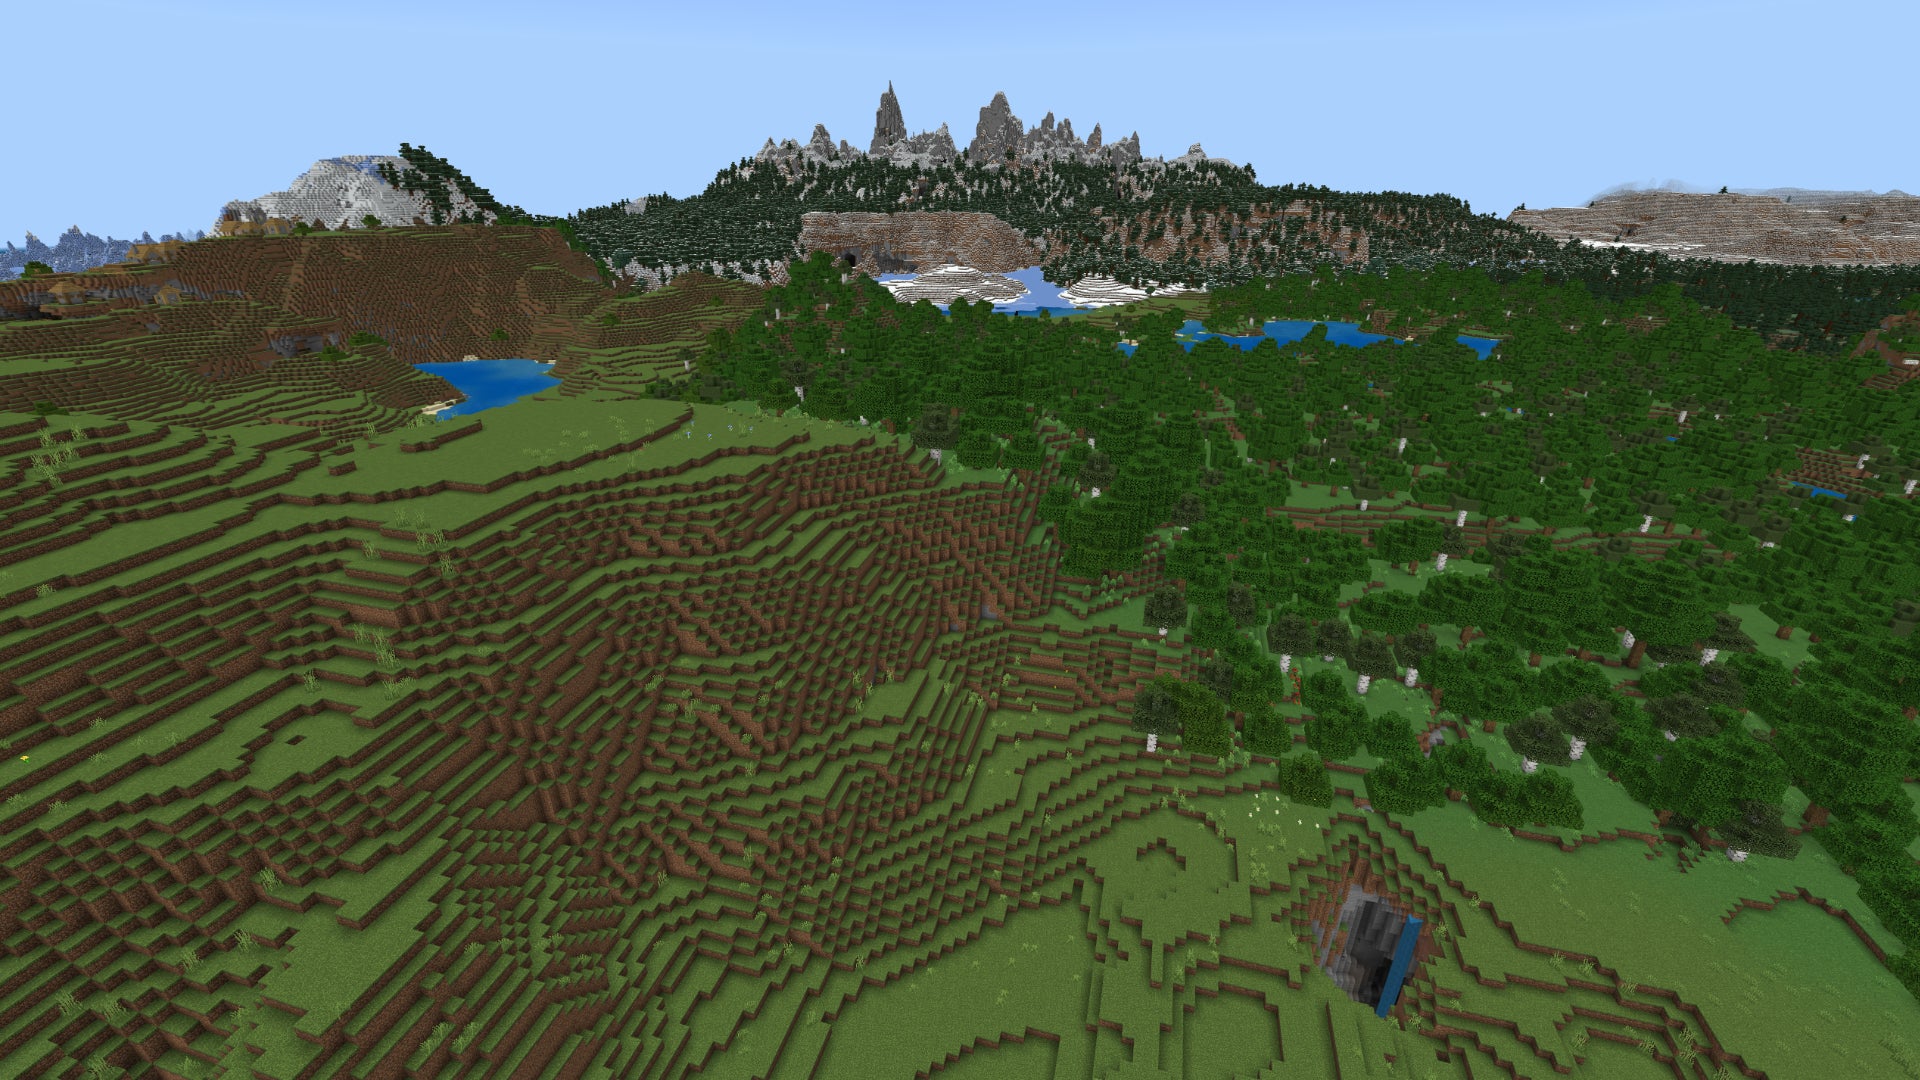 A hilly Minecraft landscape with plains on the left, forest on the right, and high snow-capped mountains in the background.